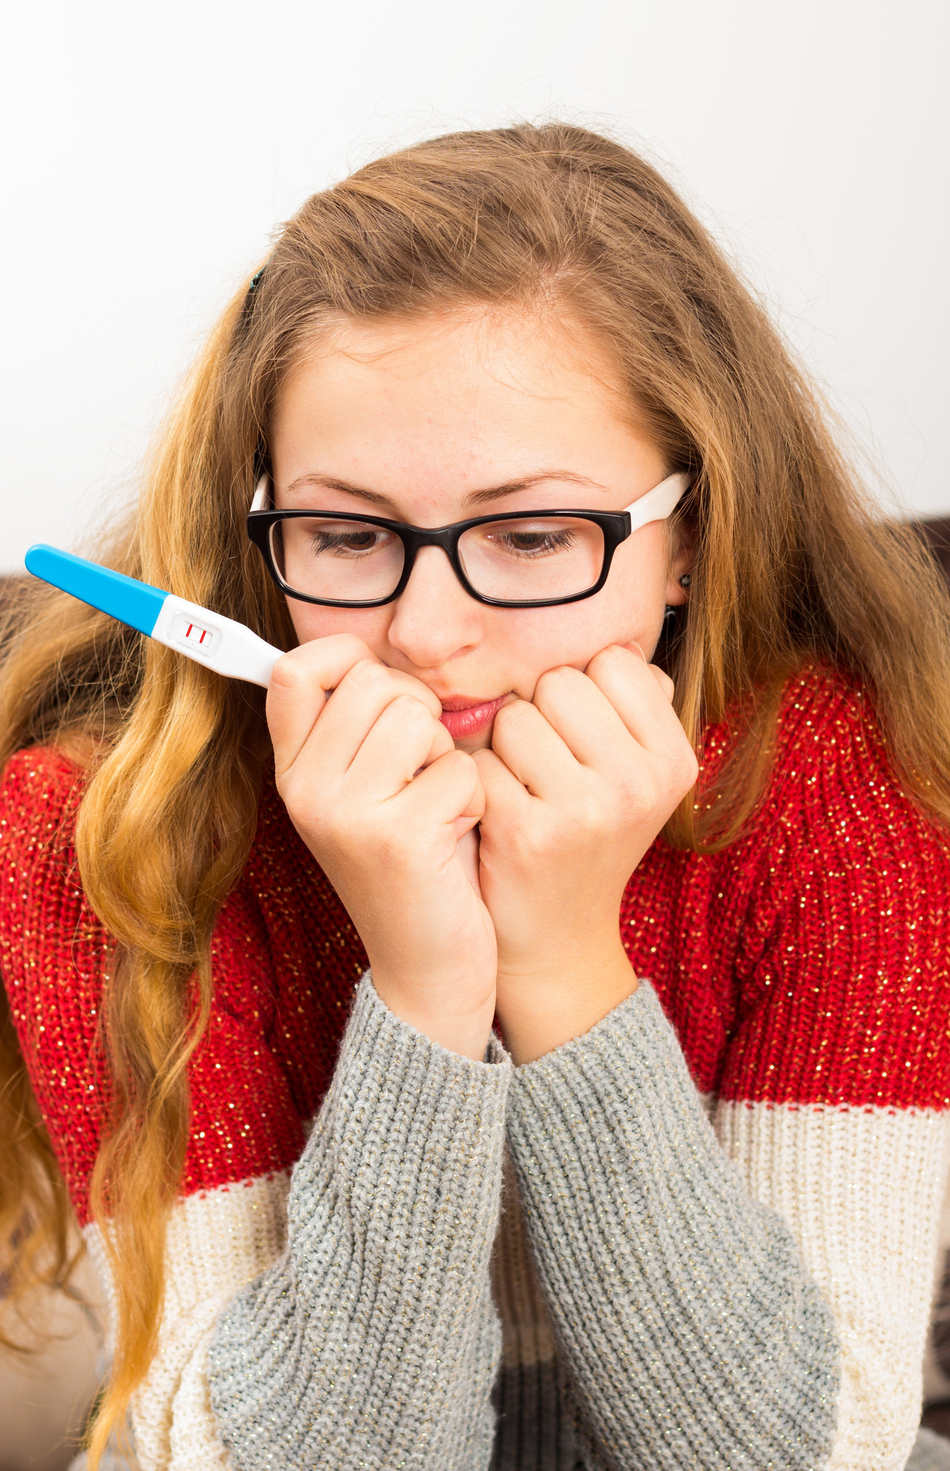 How to Prevent Teen Pregnancy, According to a Pediatrician